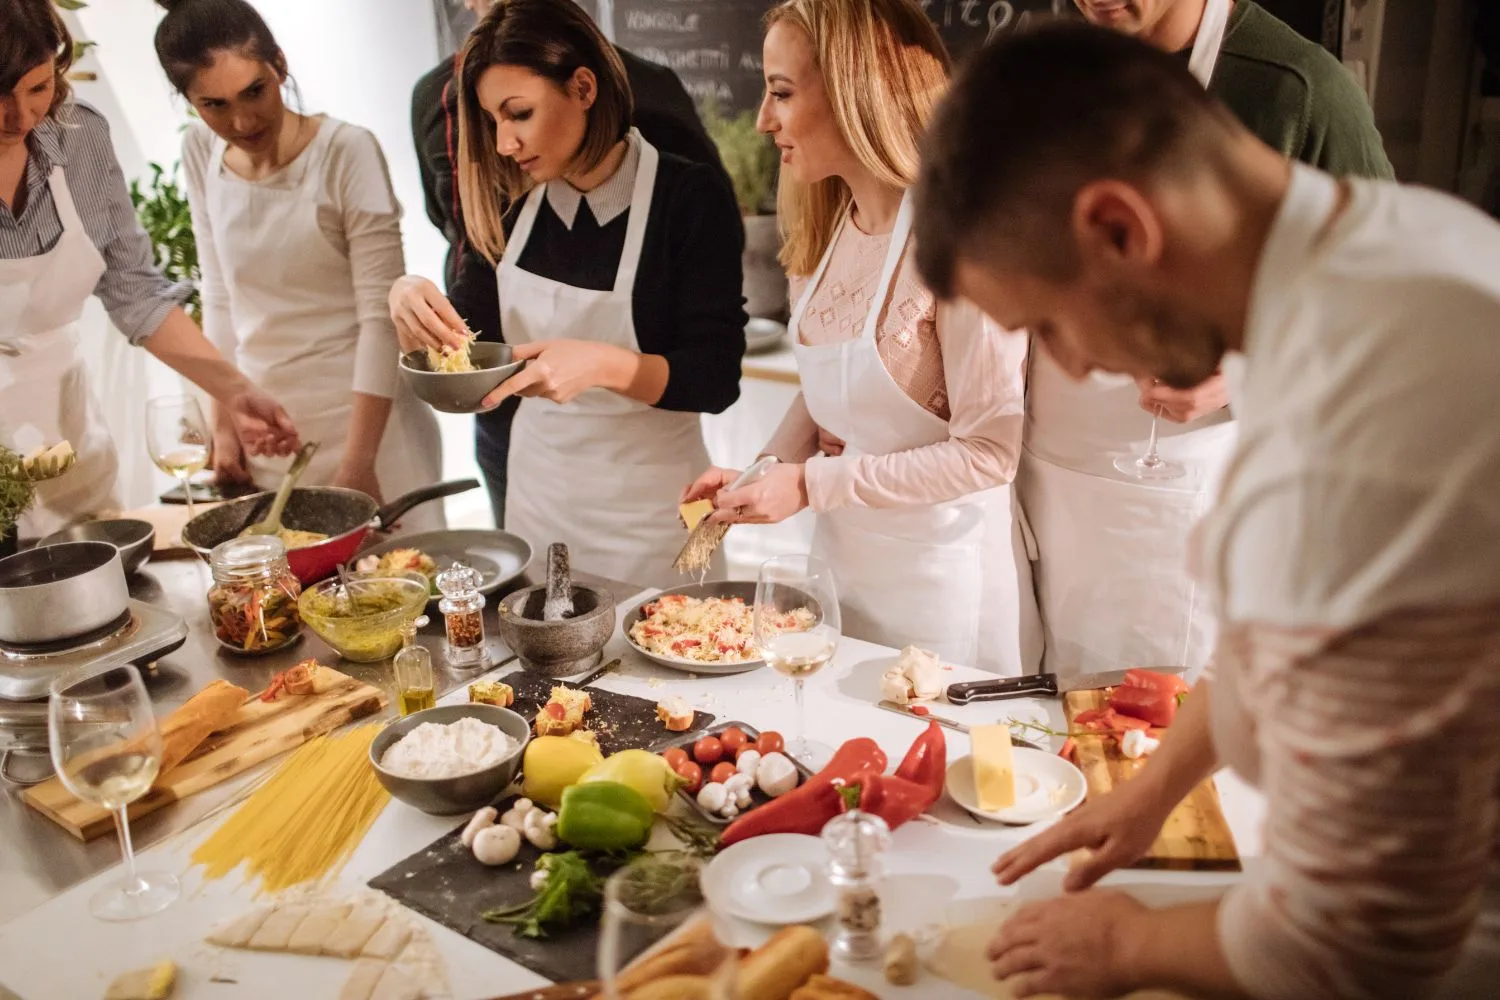 Students during a cooking class